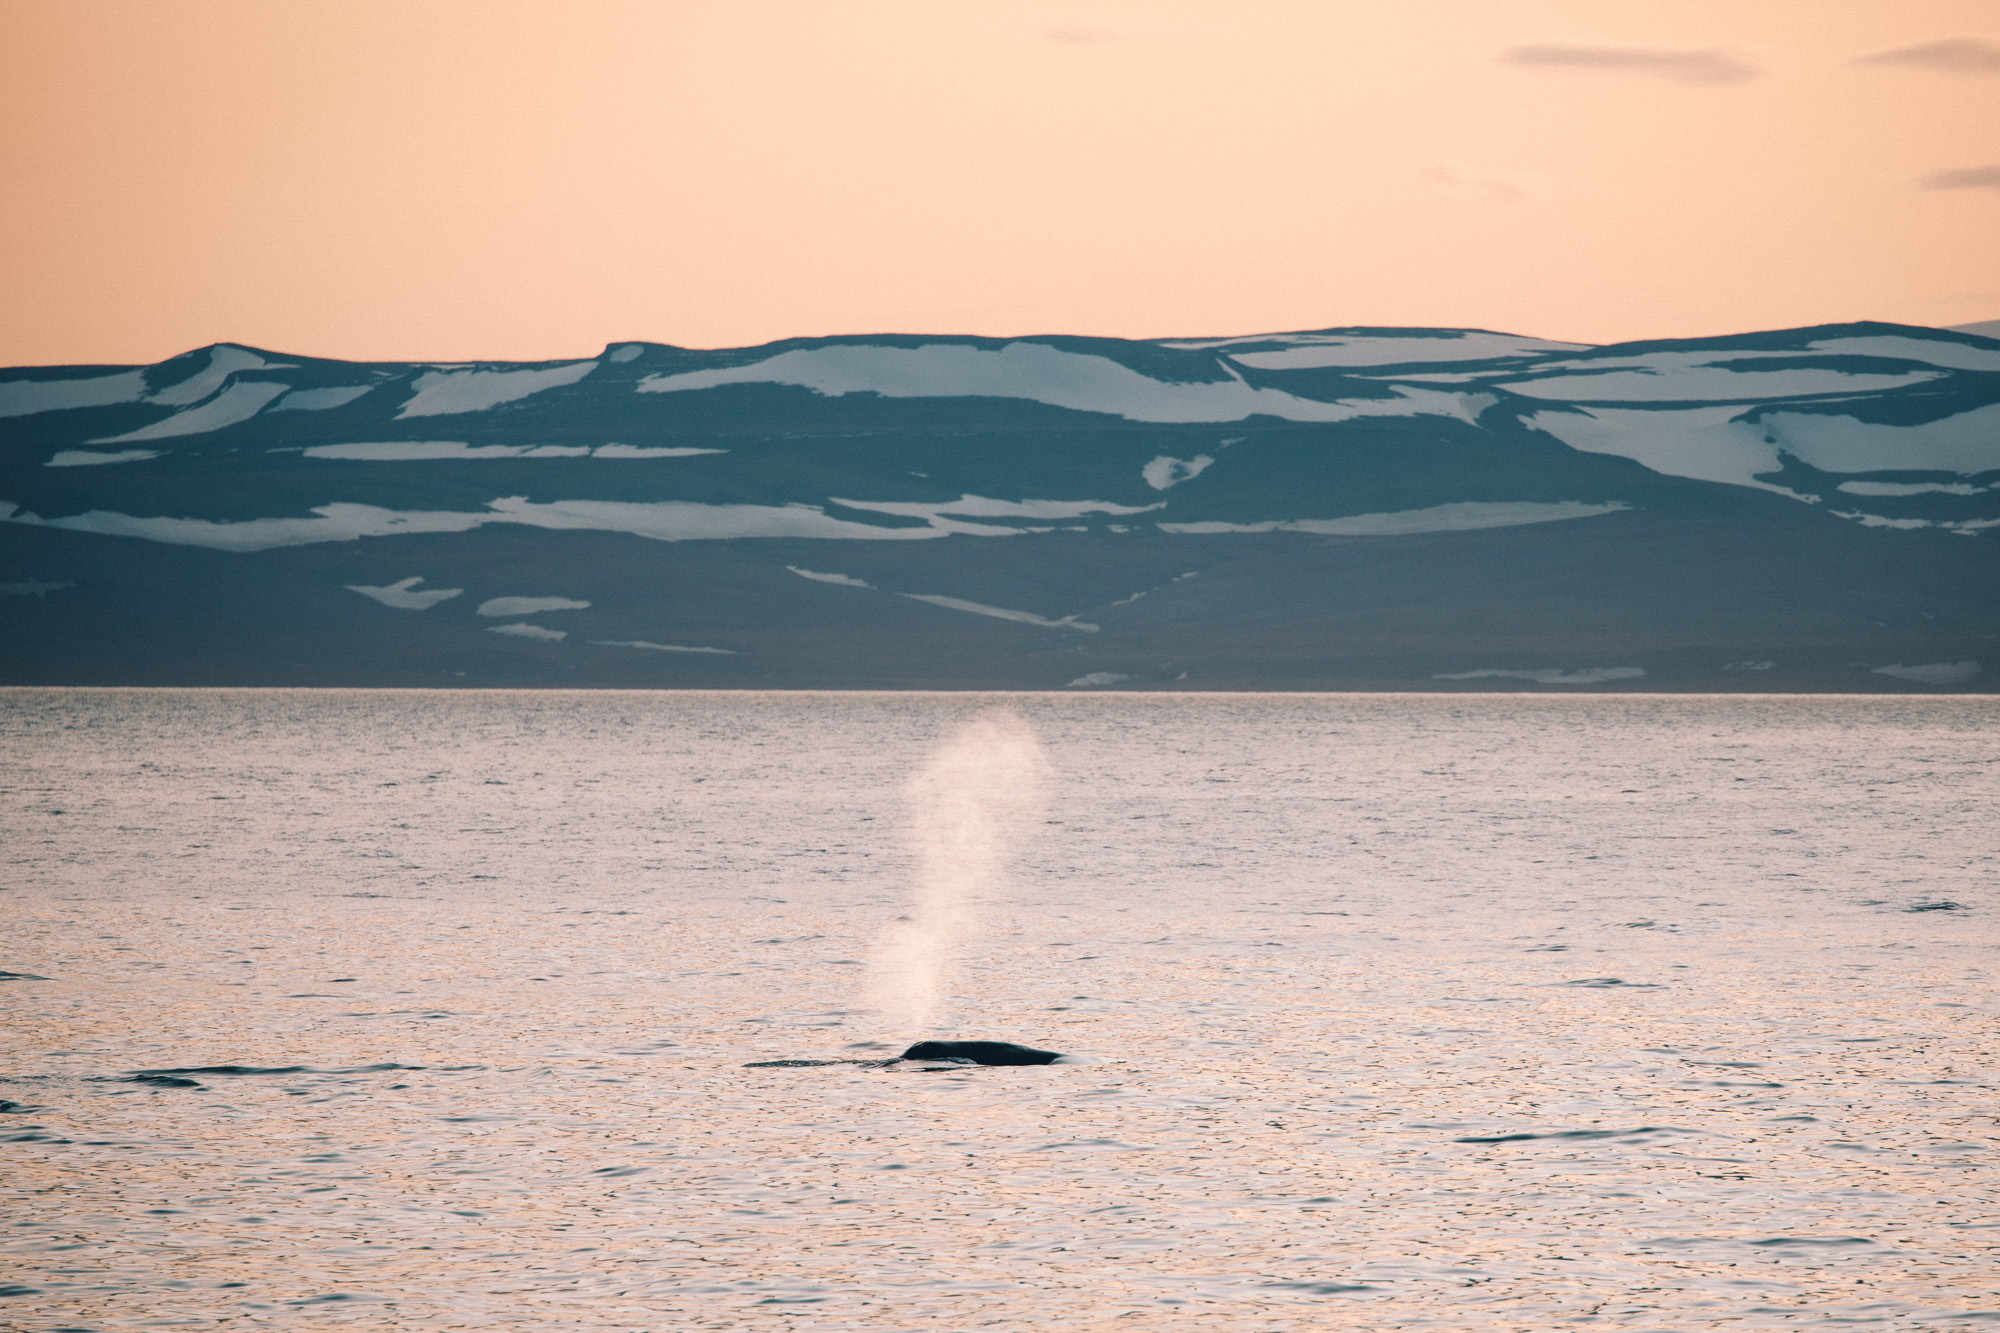 Bowhead whales from our polarquest ship in Spitsbergen, Svalbard, Norway